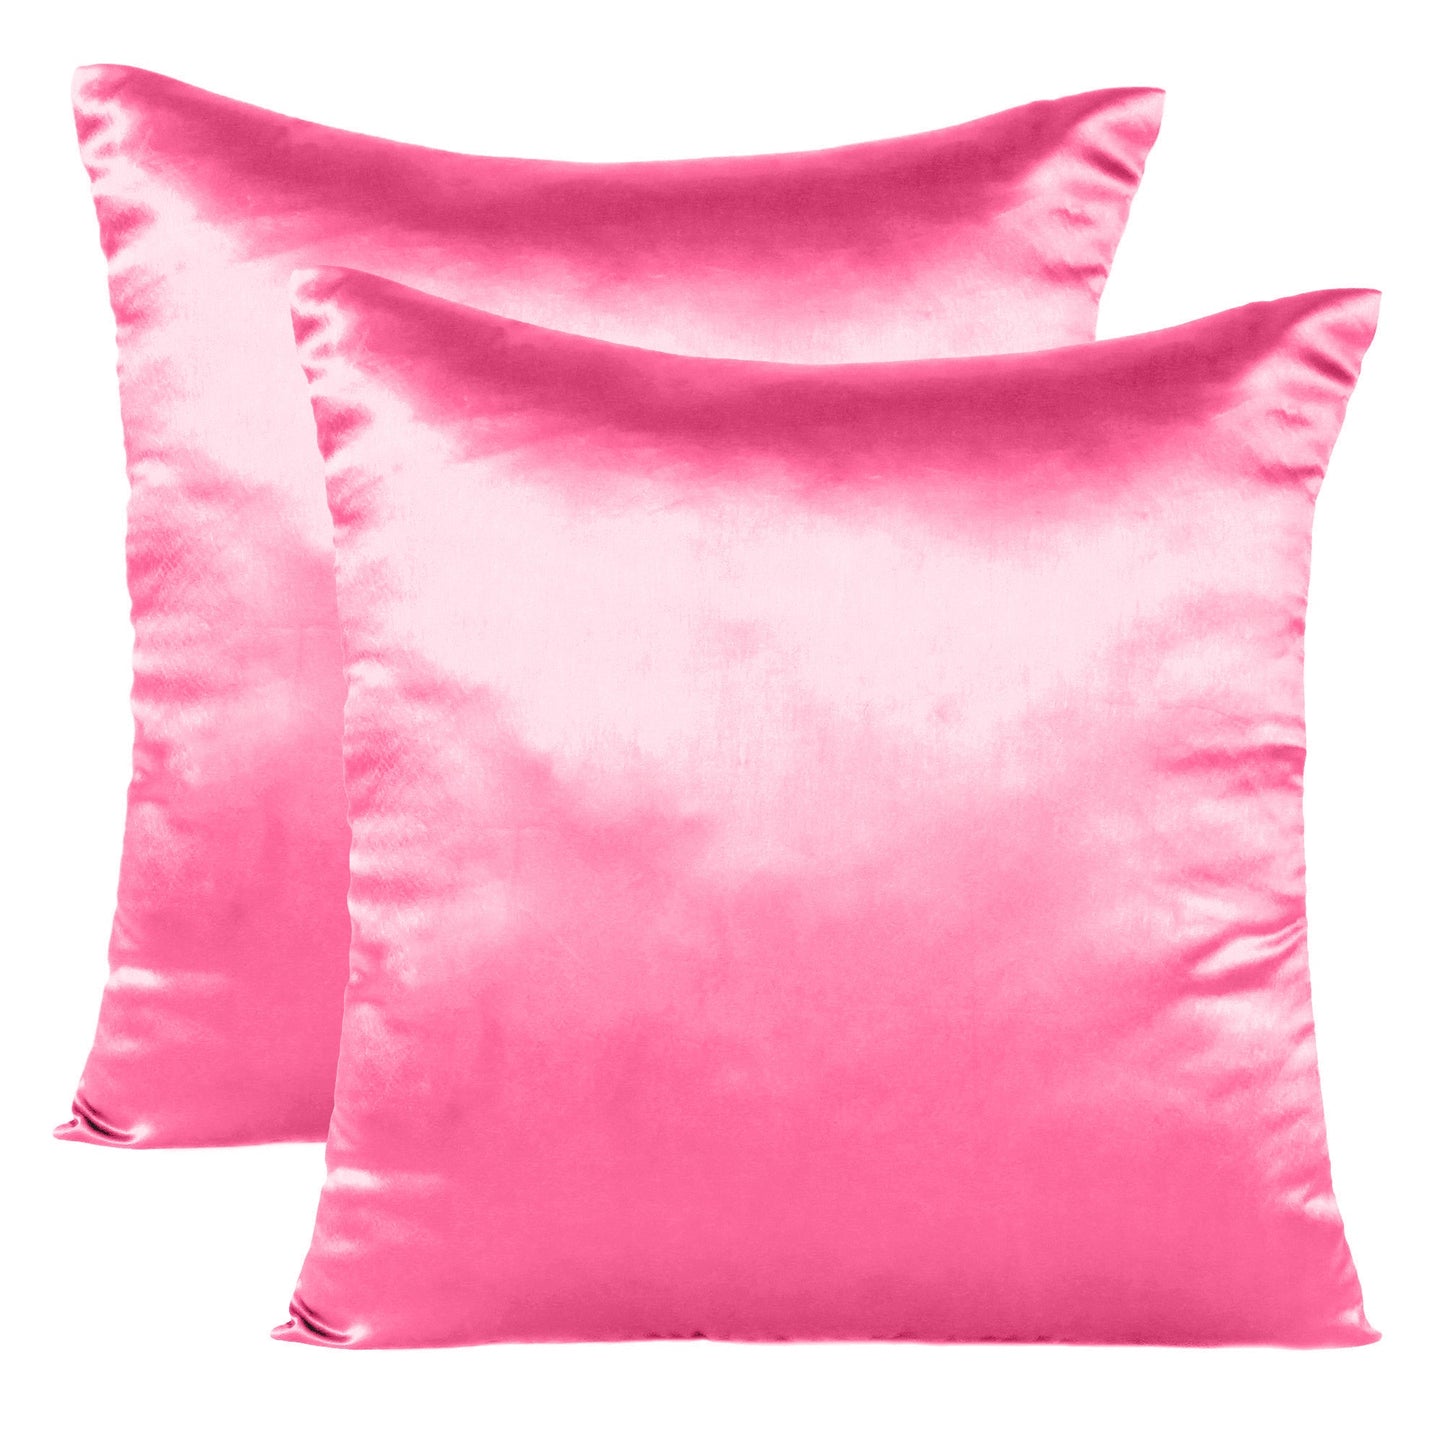 Fandango Pink Satin Silky Cushion Covers in Set of 2